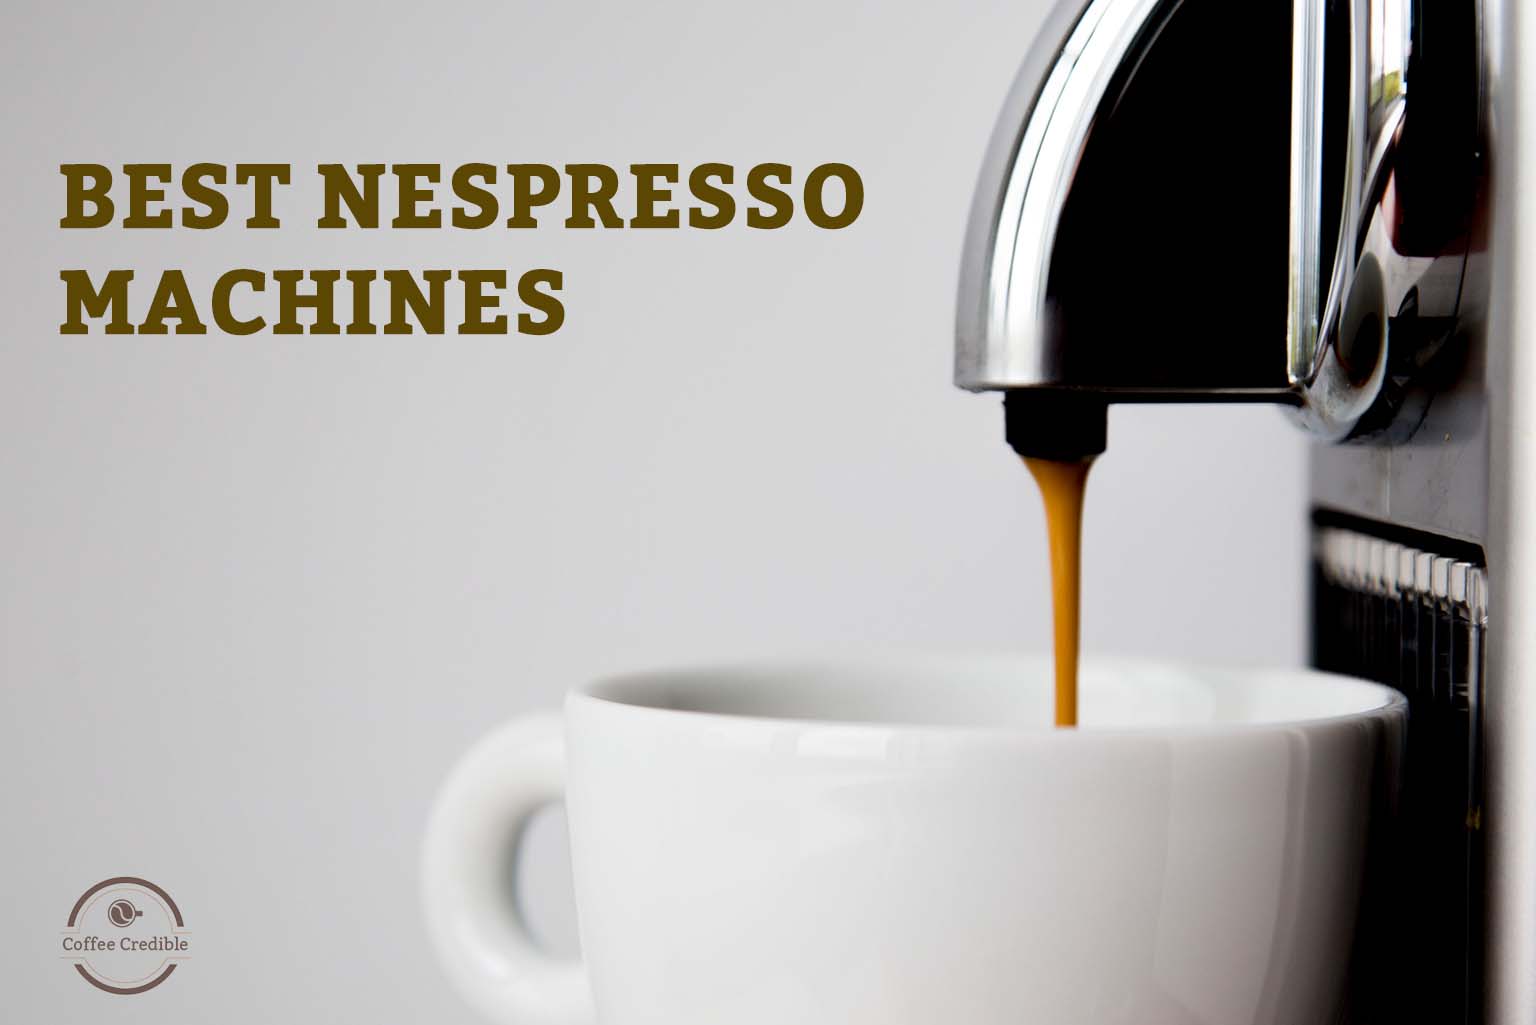 What Is The Best Nespresso Machine In 2022? Top 11 Picks Reviewed!